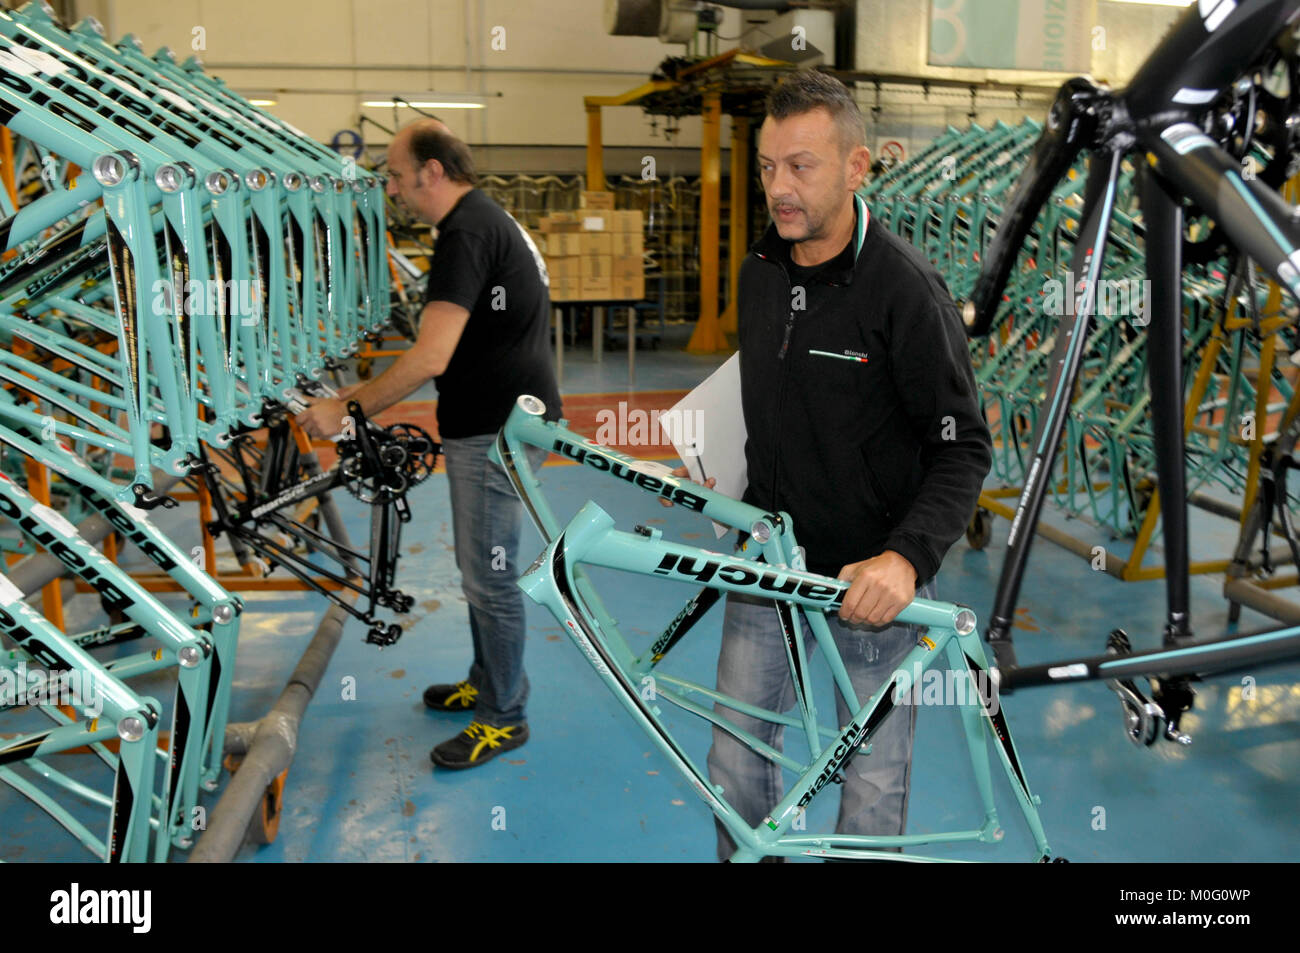 Industry 'Biciclette Bianchi' factory - Assembly line of various models of bicycles - Treviglio - Italy    Credit © Marco Vacca/Sintesi/Sintesi/Alamy  Stock Photo